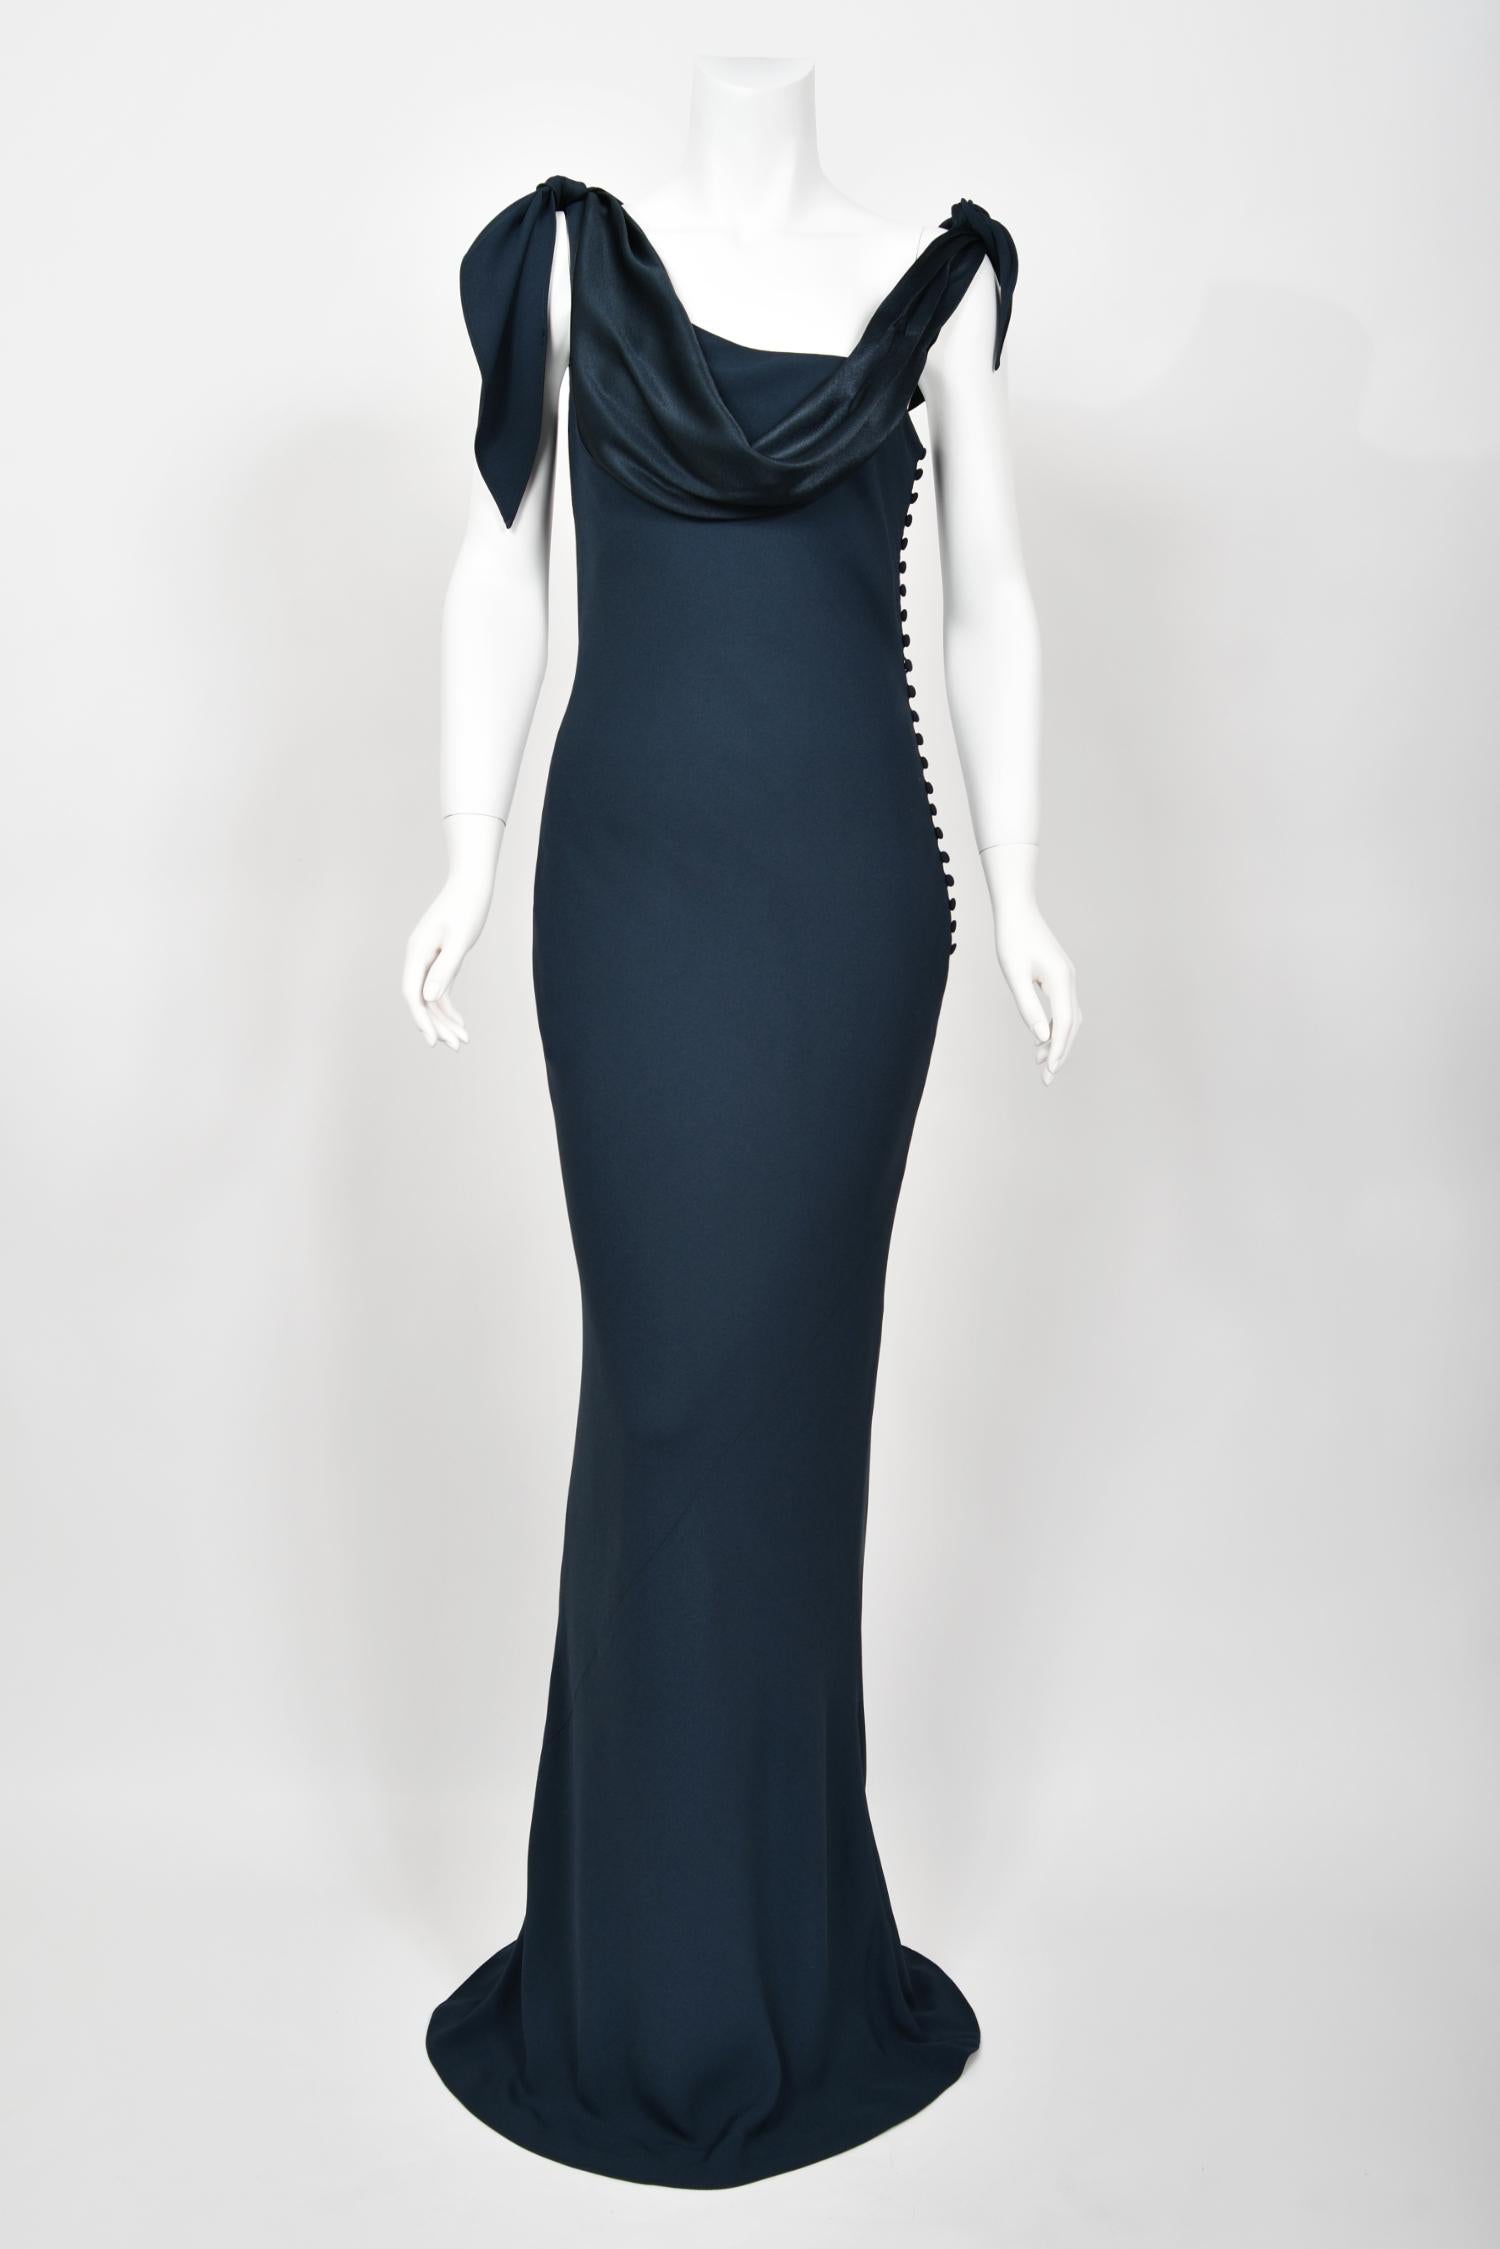 1998 Christian Dior by John Galliano Navy Blue Silk Draped Bias-Cut Evening Gown For Sale 2